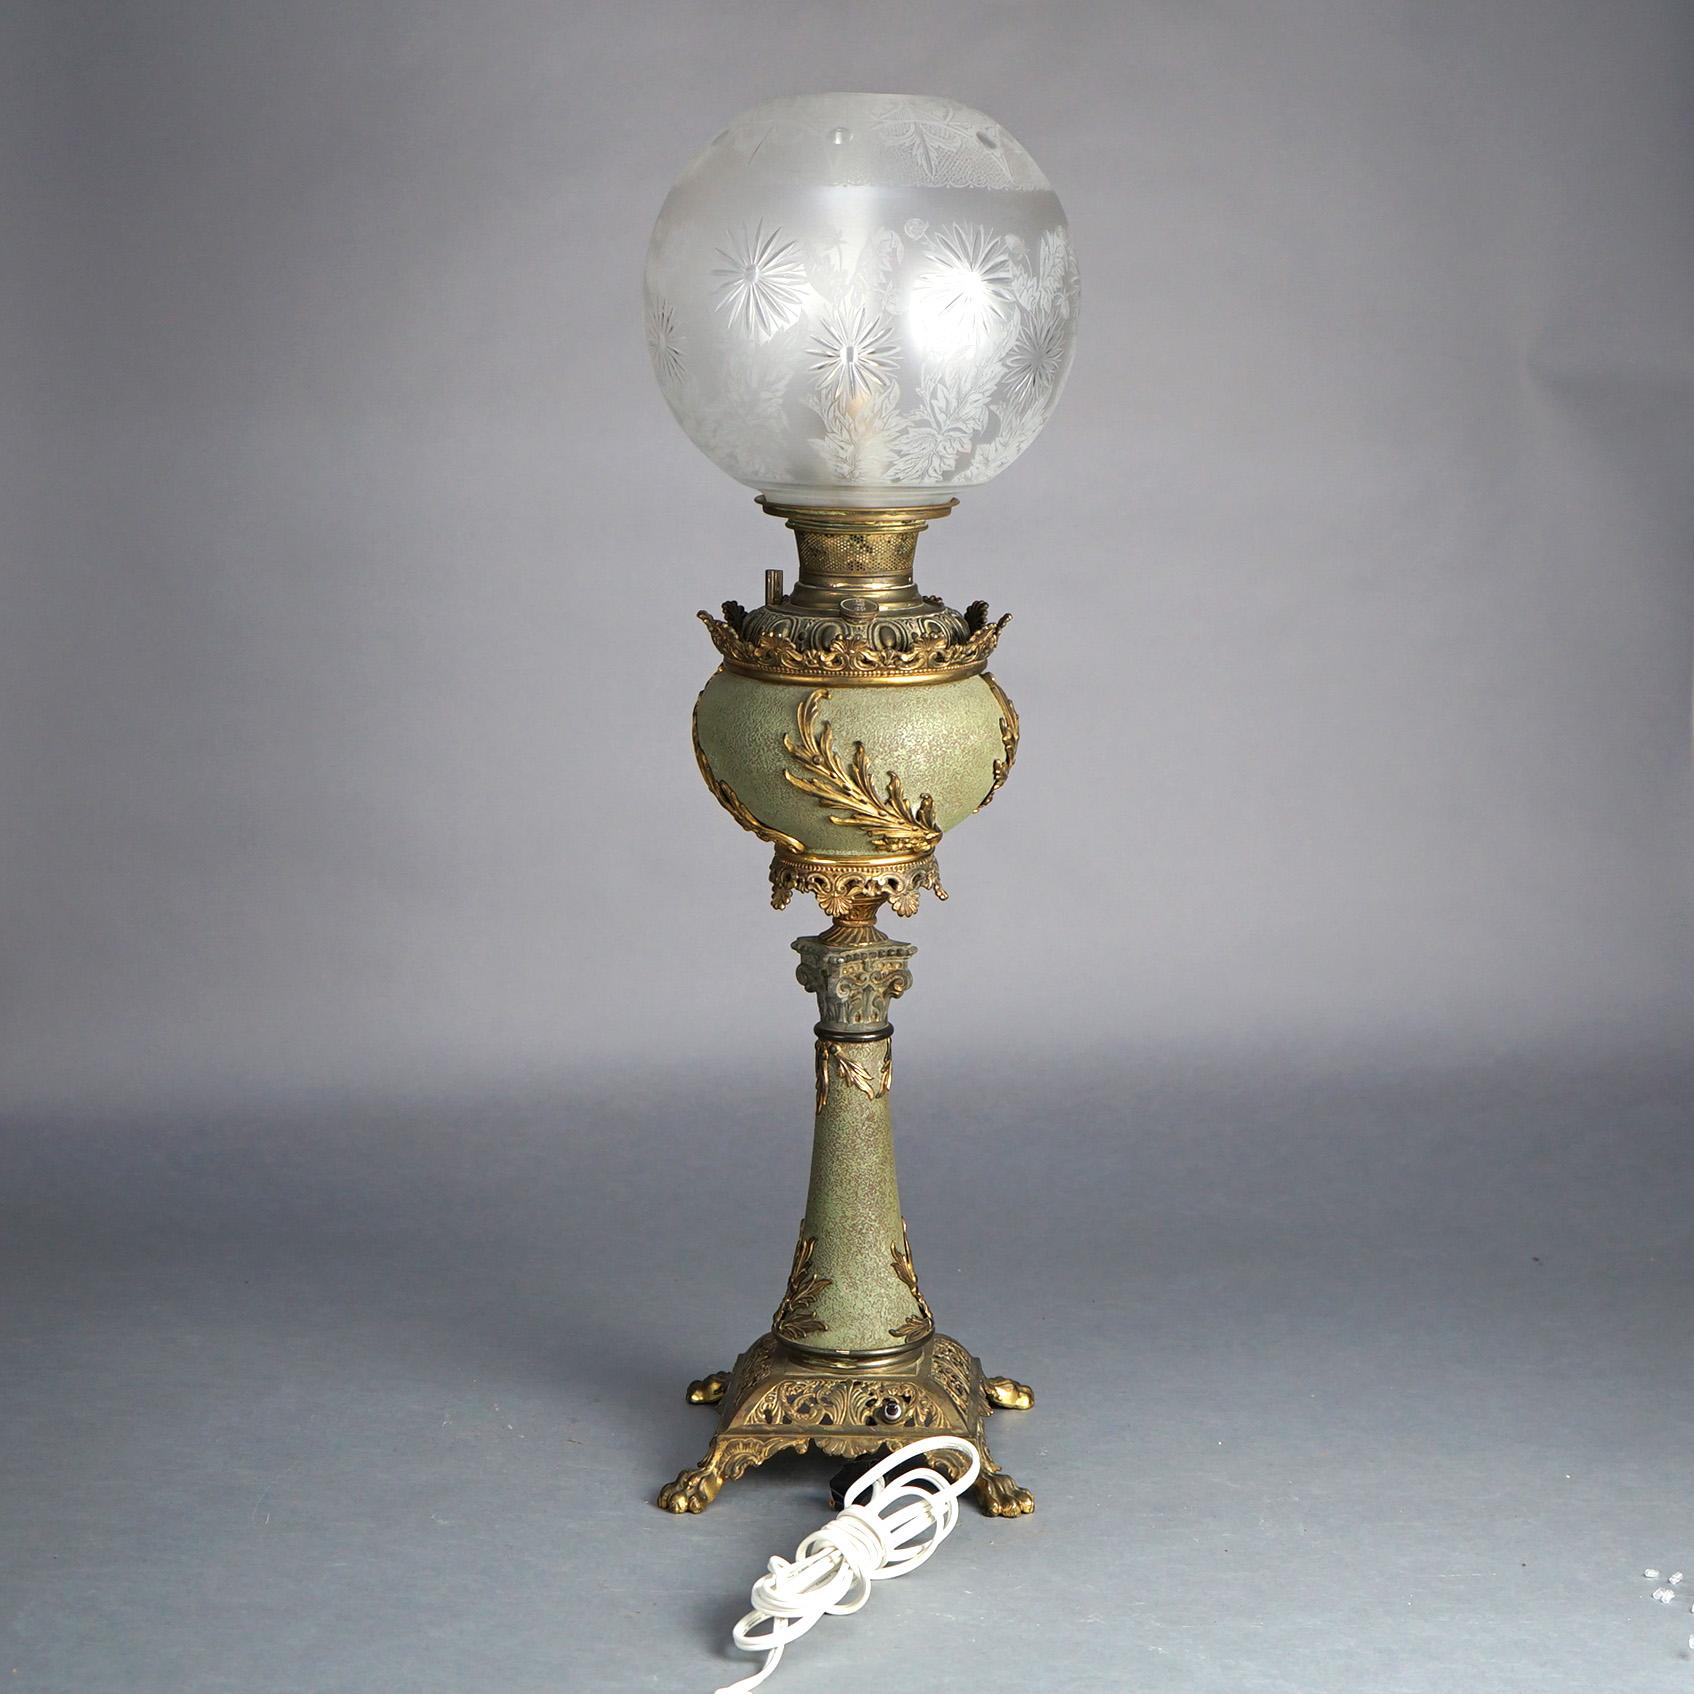 American Antique Bradley & Hubbard Classical Brass Parlor Lamp with Verdigris Finish 